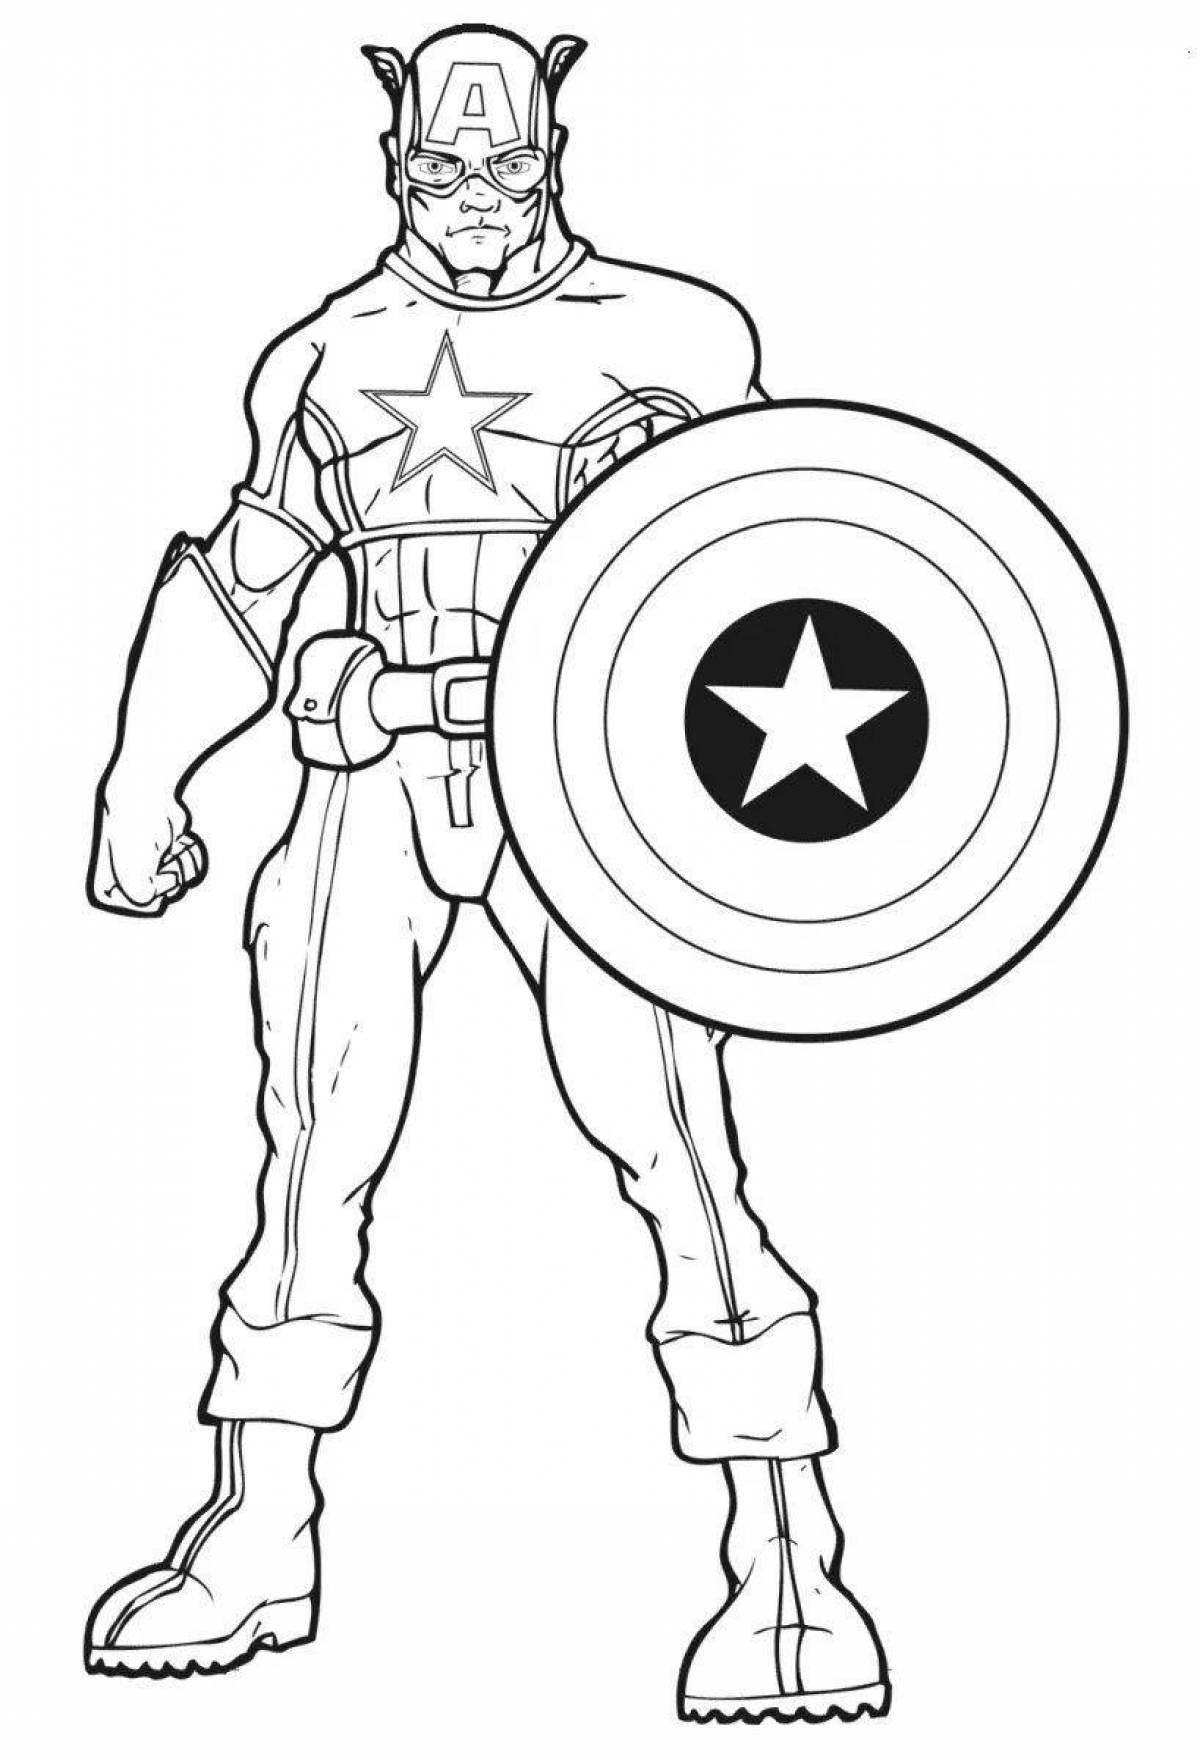 Colouring playful captain america for boys